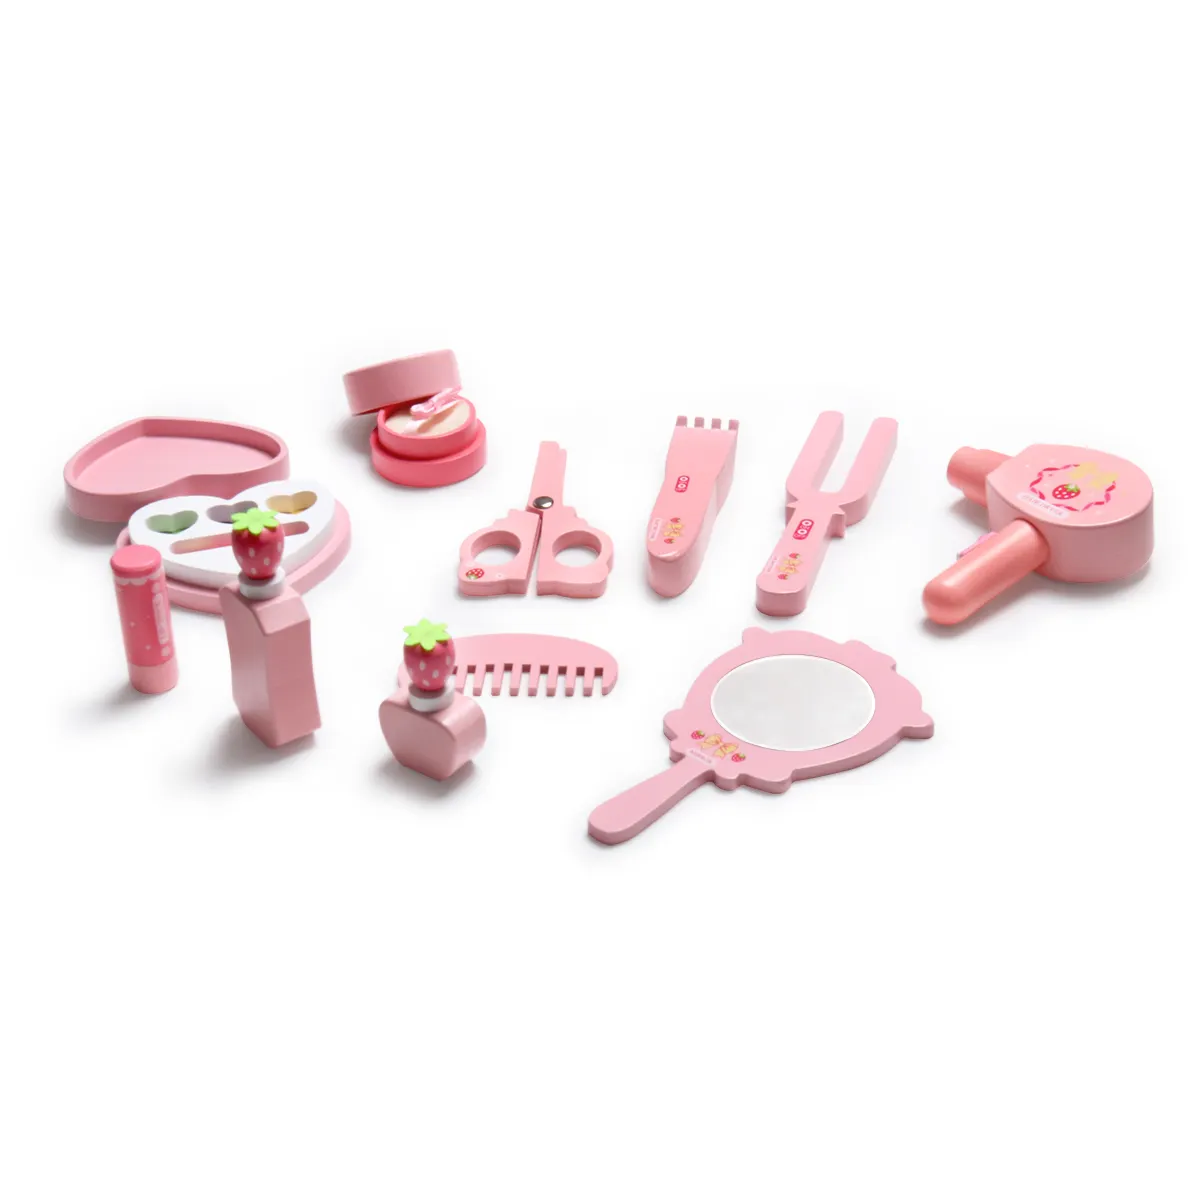 Girls Kids Gifts Wooden Toy Pretend Play Makeup Kit Role Play Cosmetics Toy Wooden Makeup Toy Set Kids Girl Children